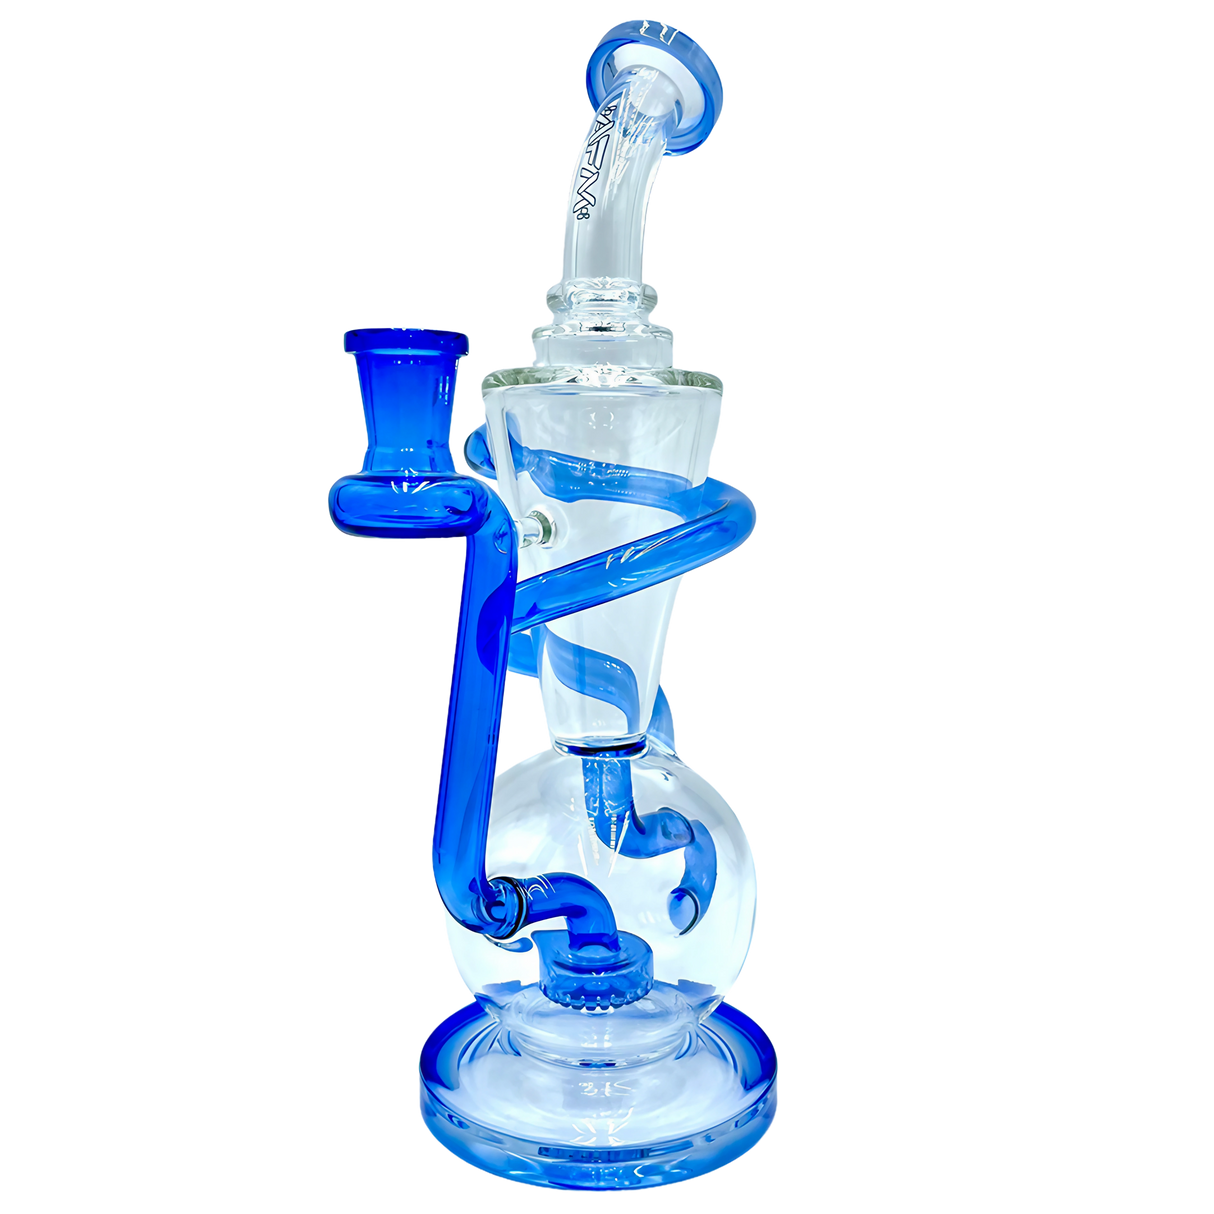 AFM The Swirly Wiry Recycler Dab Rig in Blue - 10.5" with Showerhead Percolator, Front View